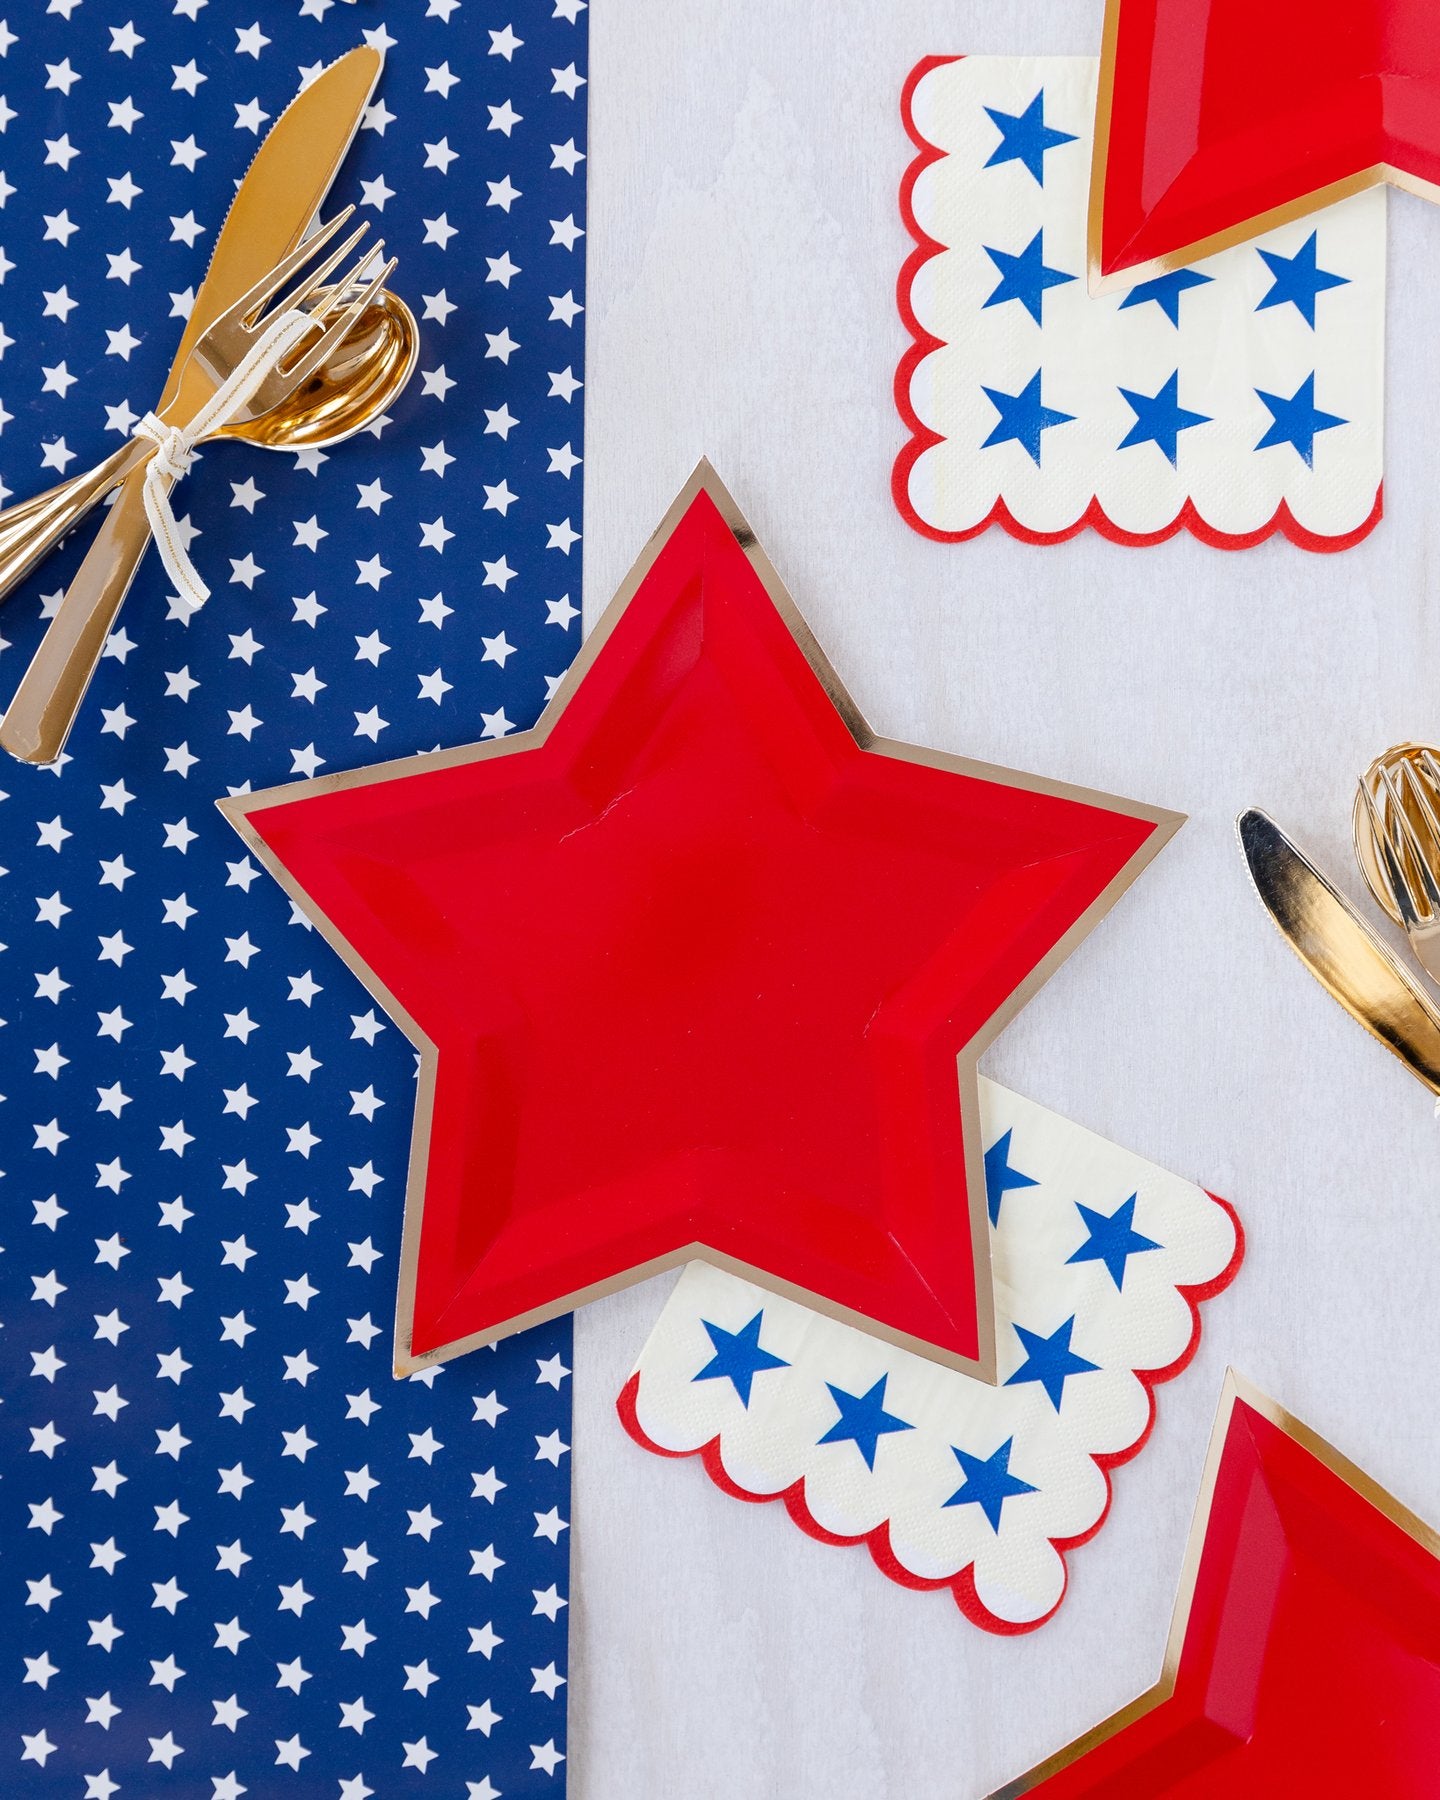 Patriotic Red, White & Blue Stars Beverage Napkins 25ct | The Party Darling